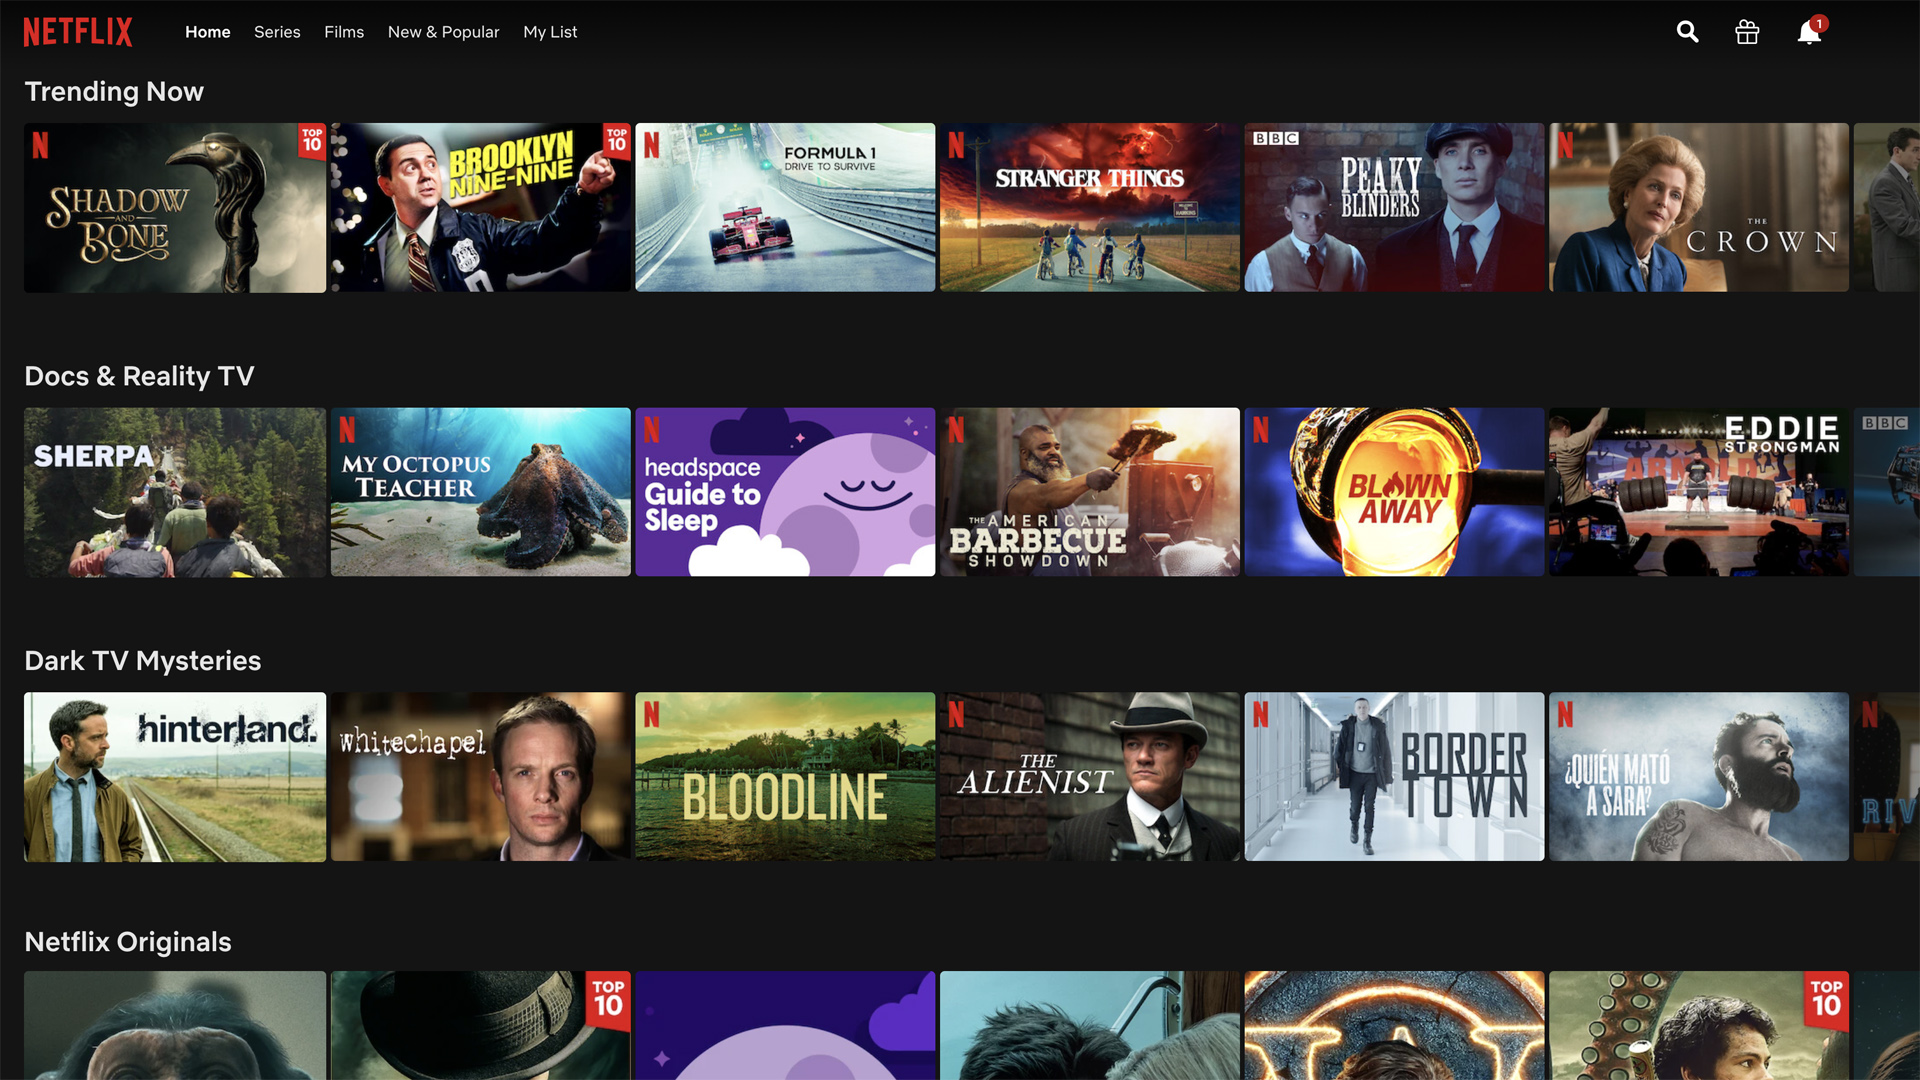 Netflix is very seriously exploring TV and PC gaming - FlatpanelsHD